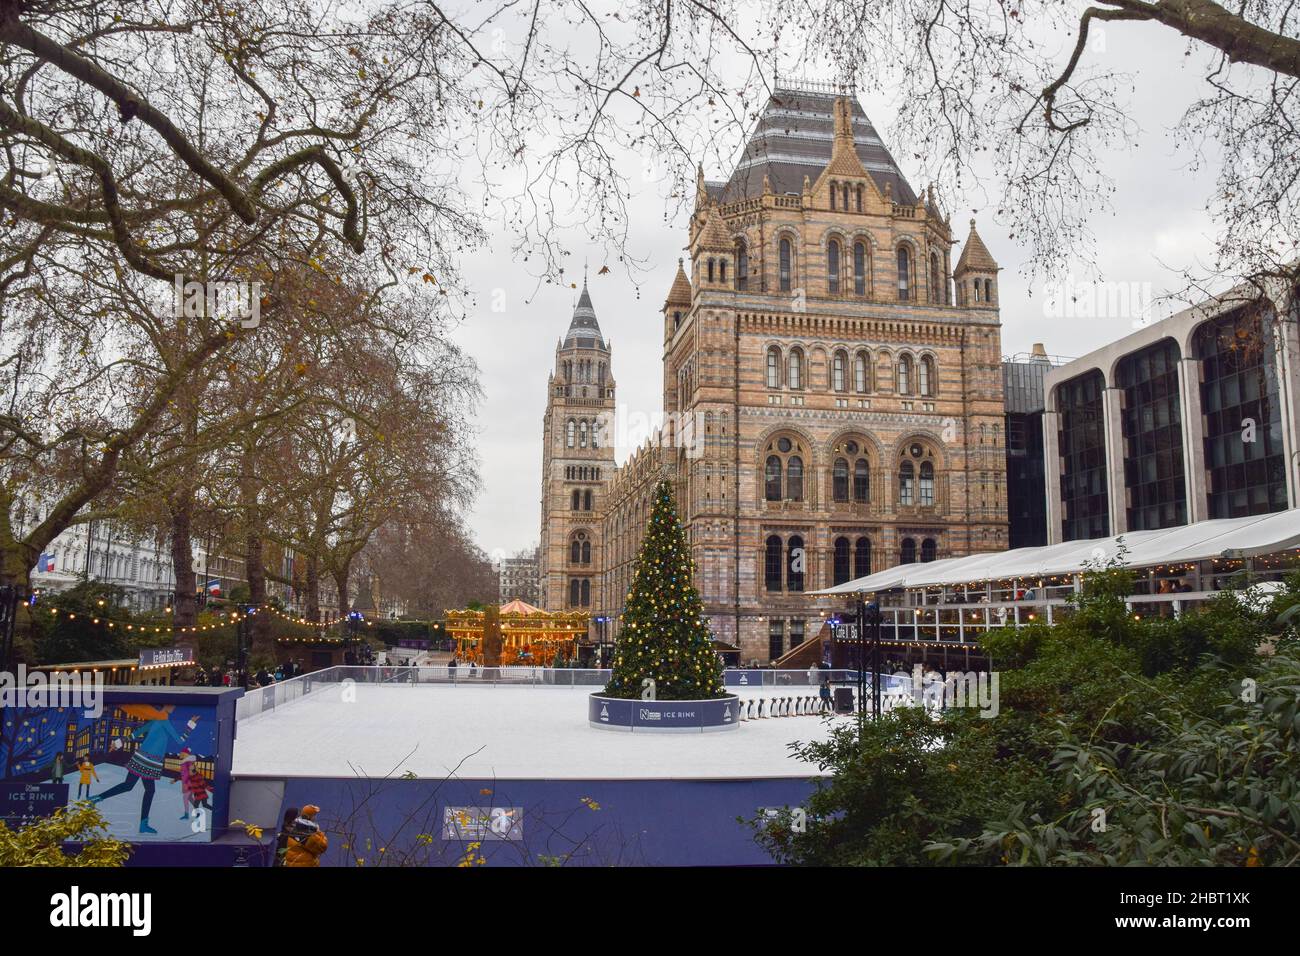 London, UK 21st December 2021. The ice skating rink outside the Natural History Museum. Stock Photo